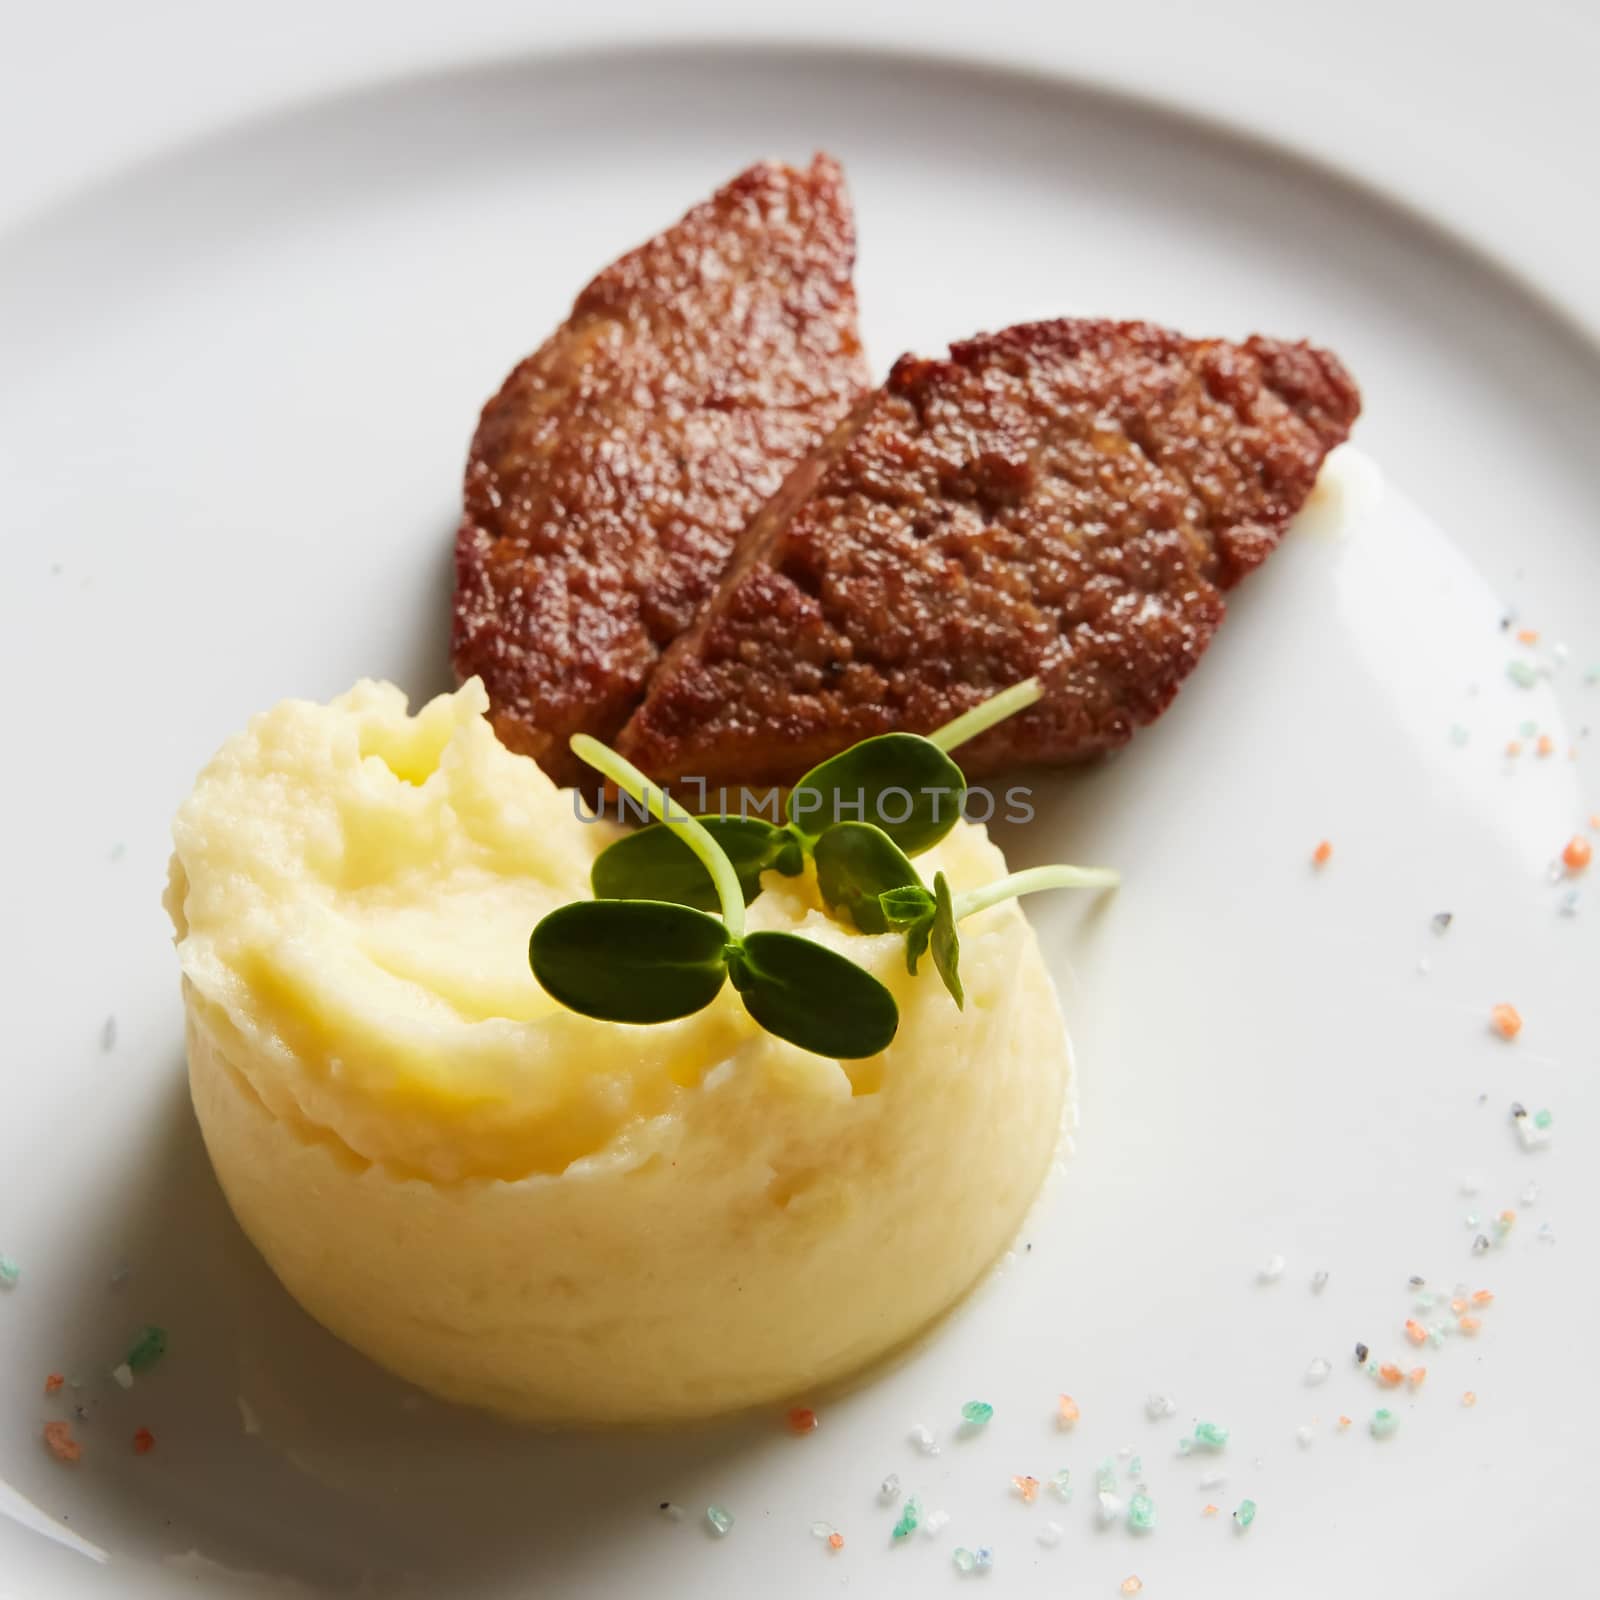 delicious mashed potatoes sprinkled with greens, juicy meat cutl by sarymsakov